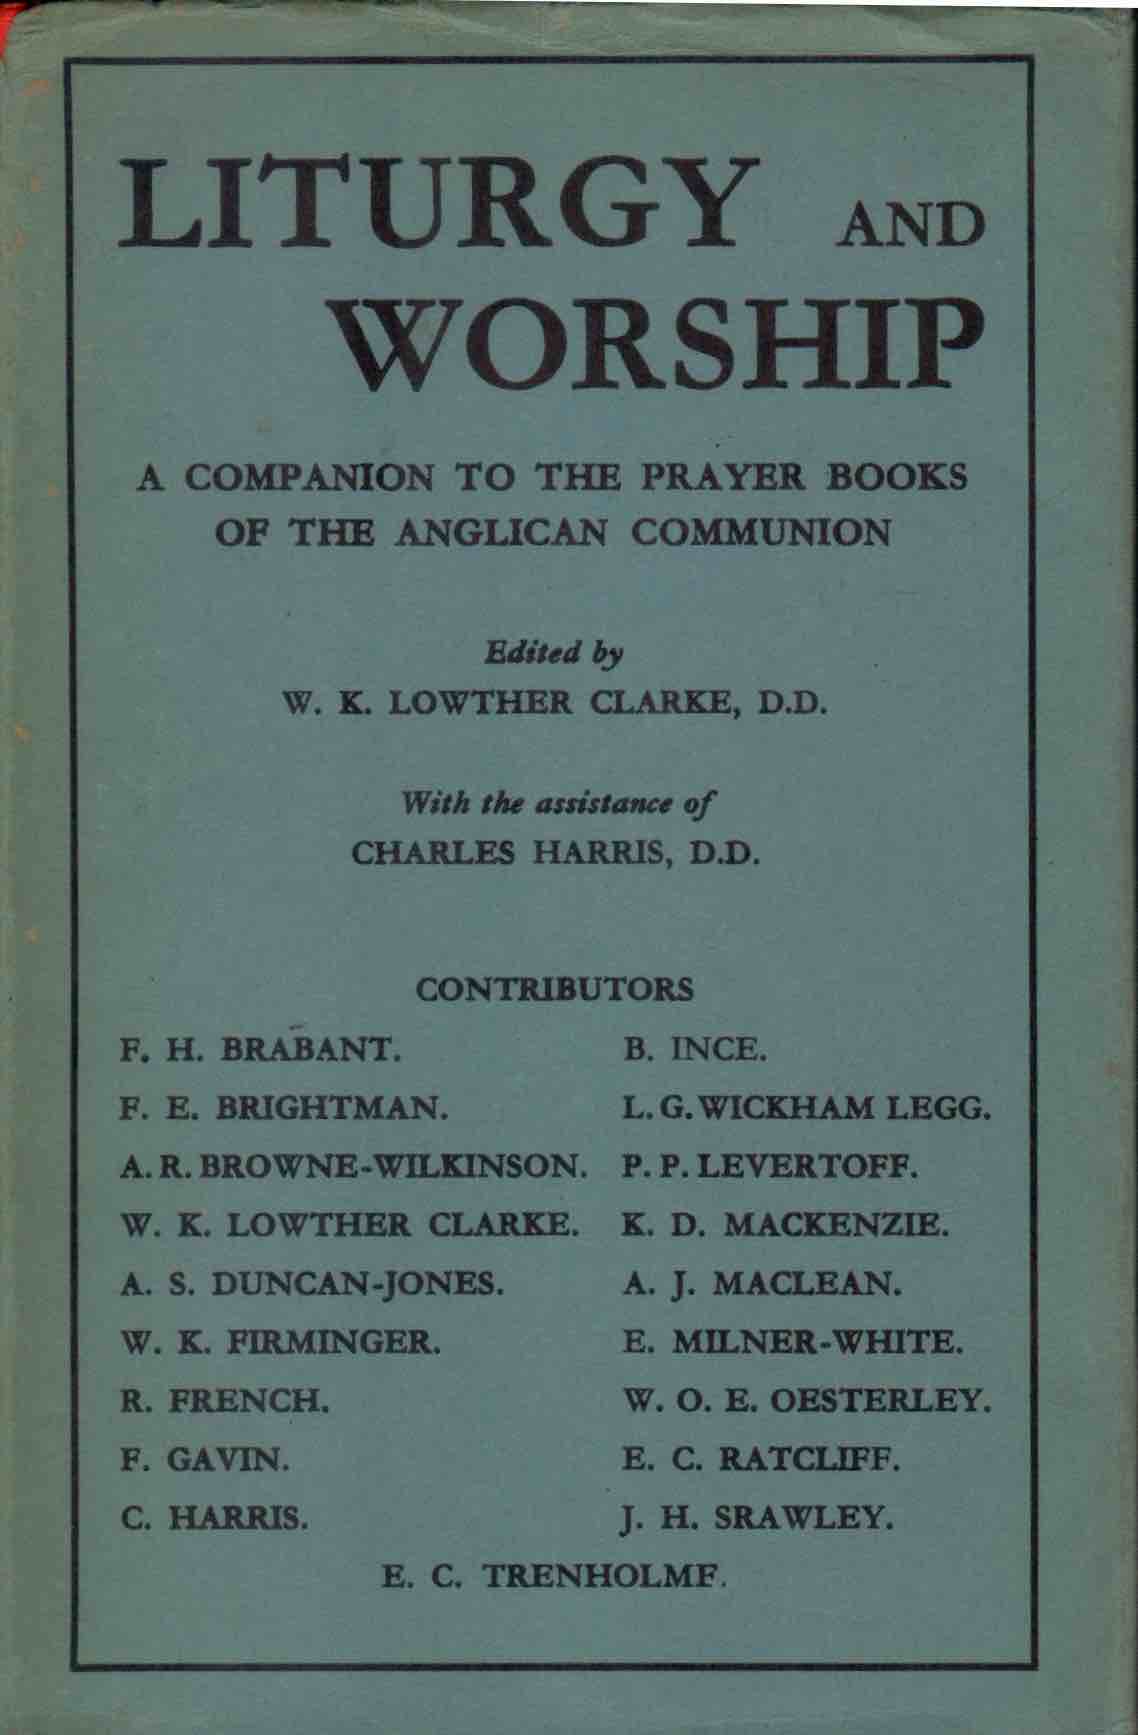 Cover of Liturgy and Worship